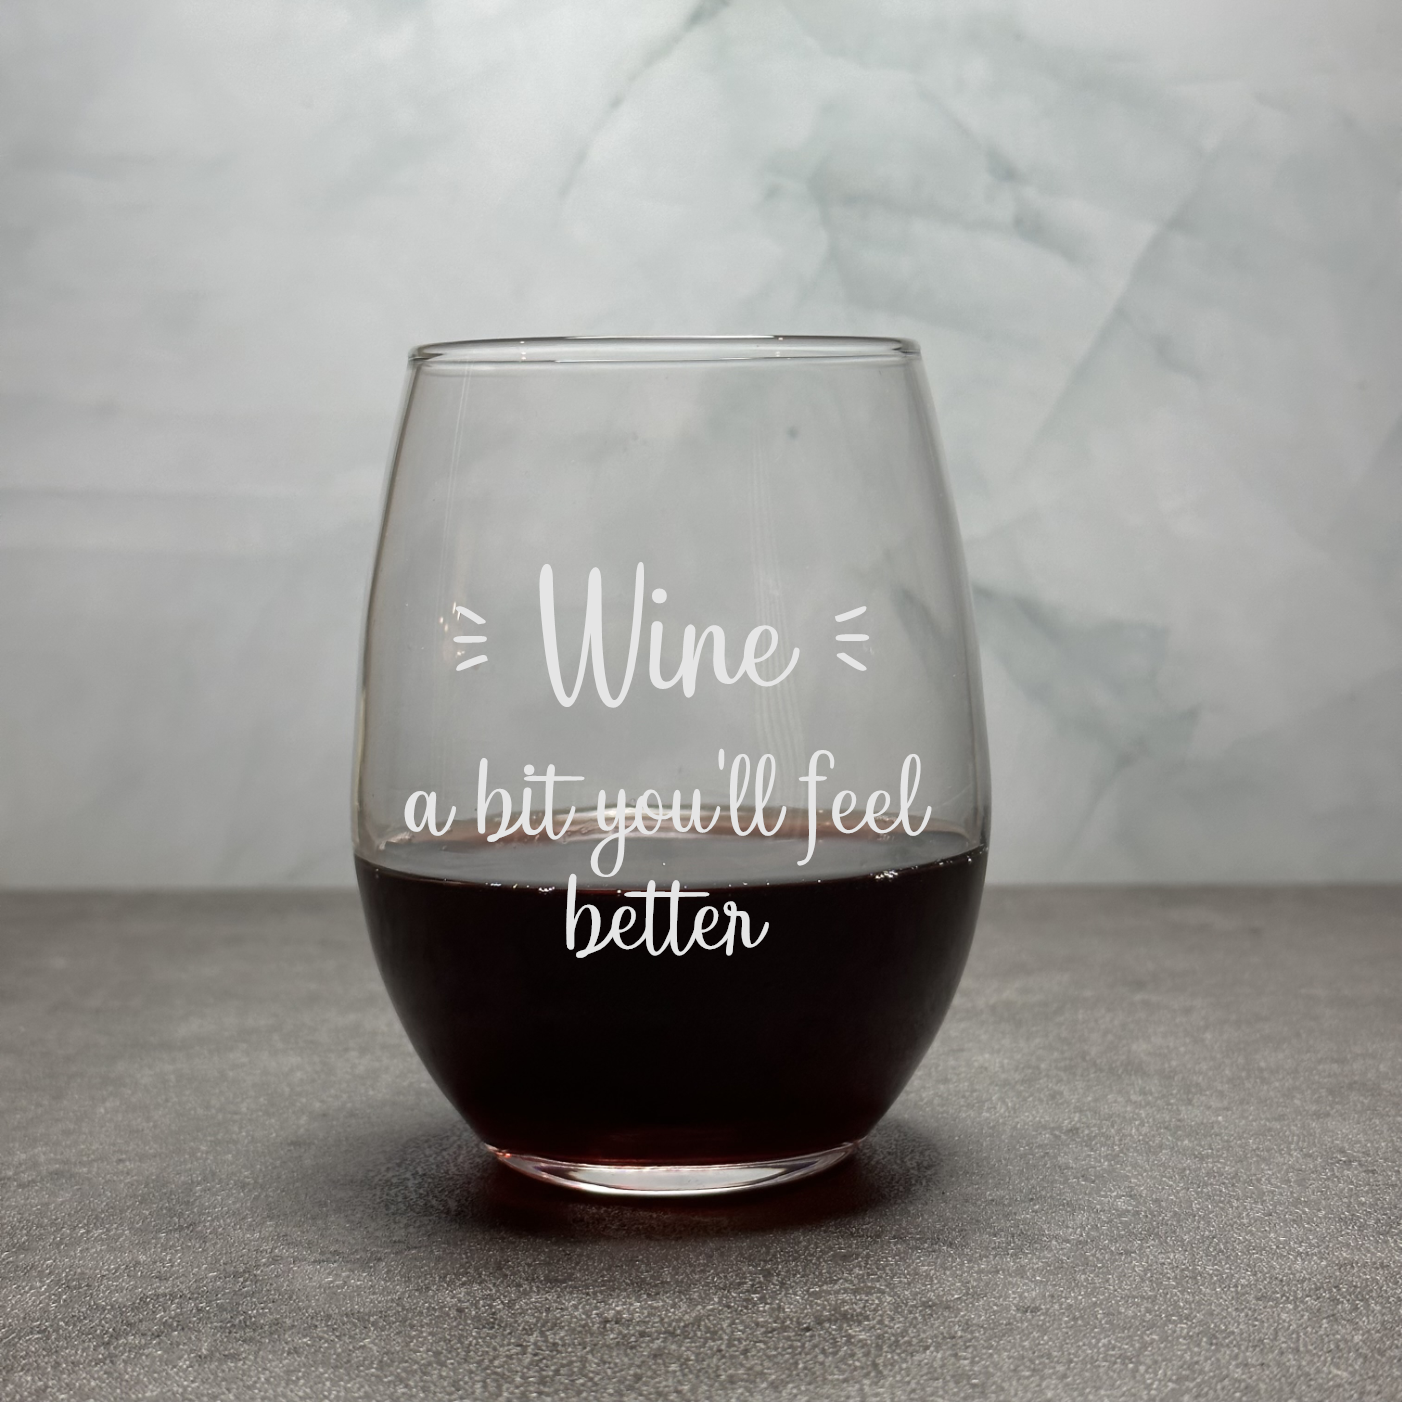 Texas Stars Constellation Etched Stemless Wine Glass